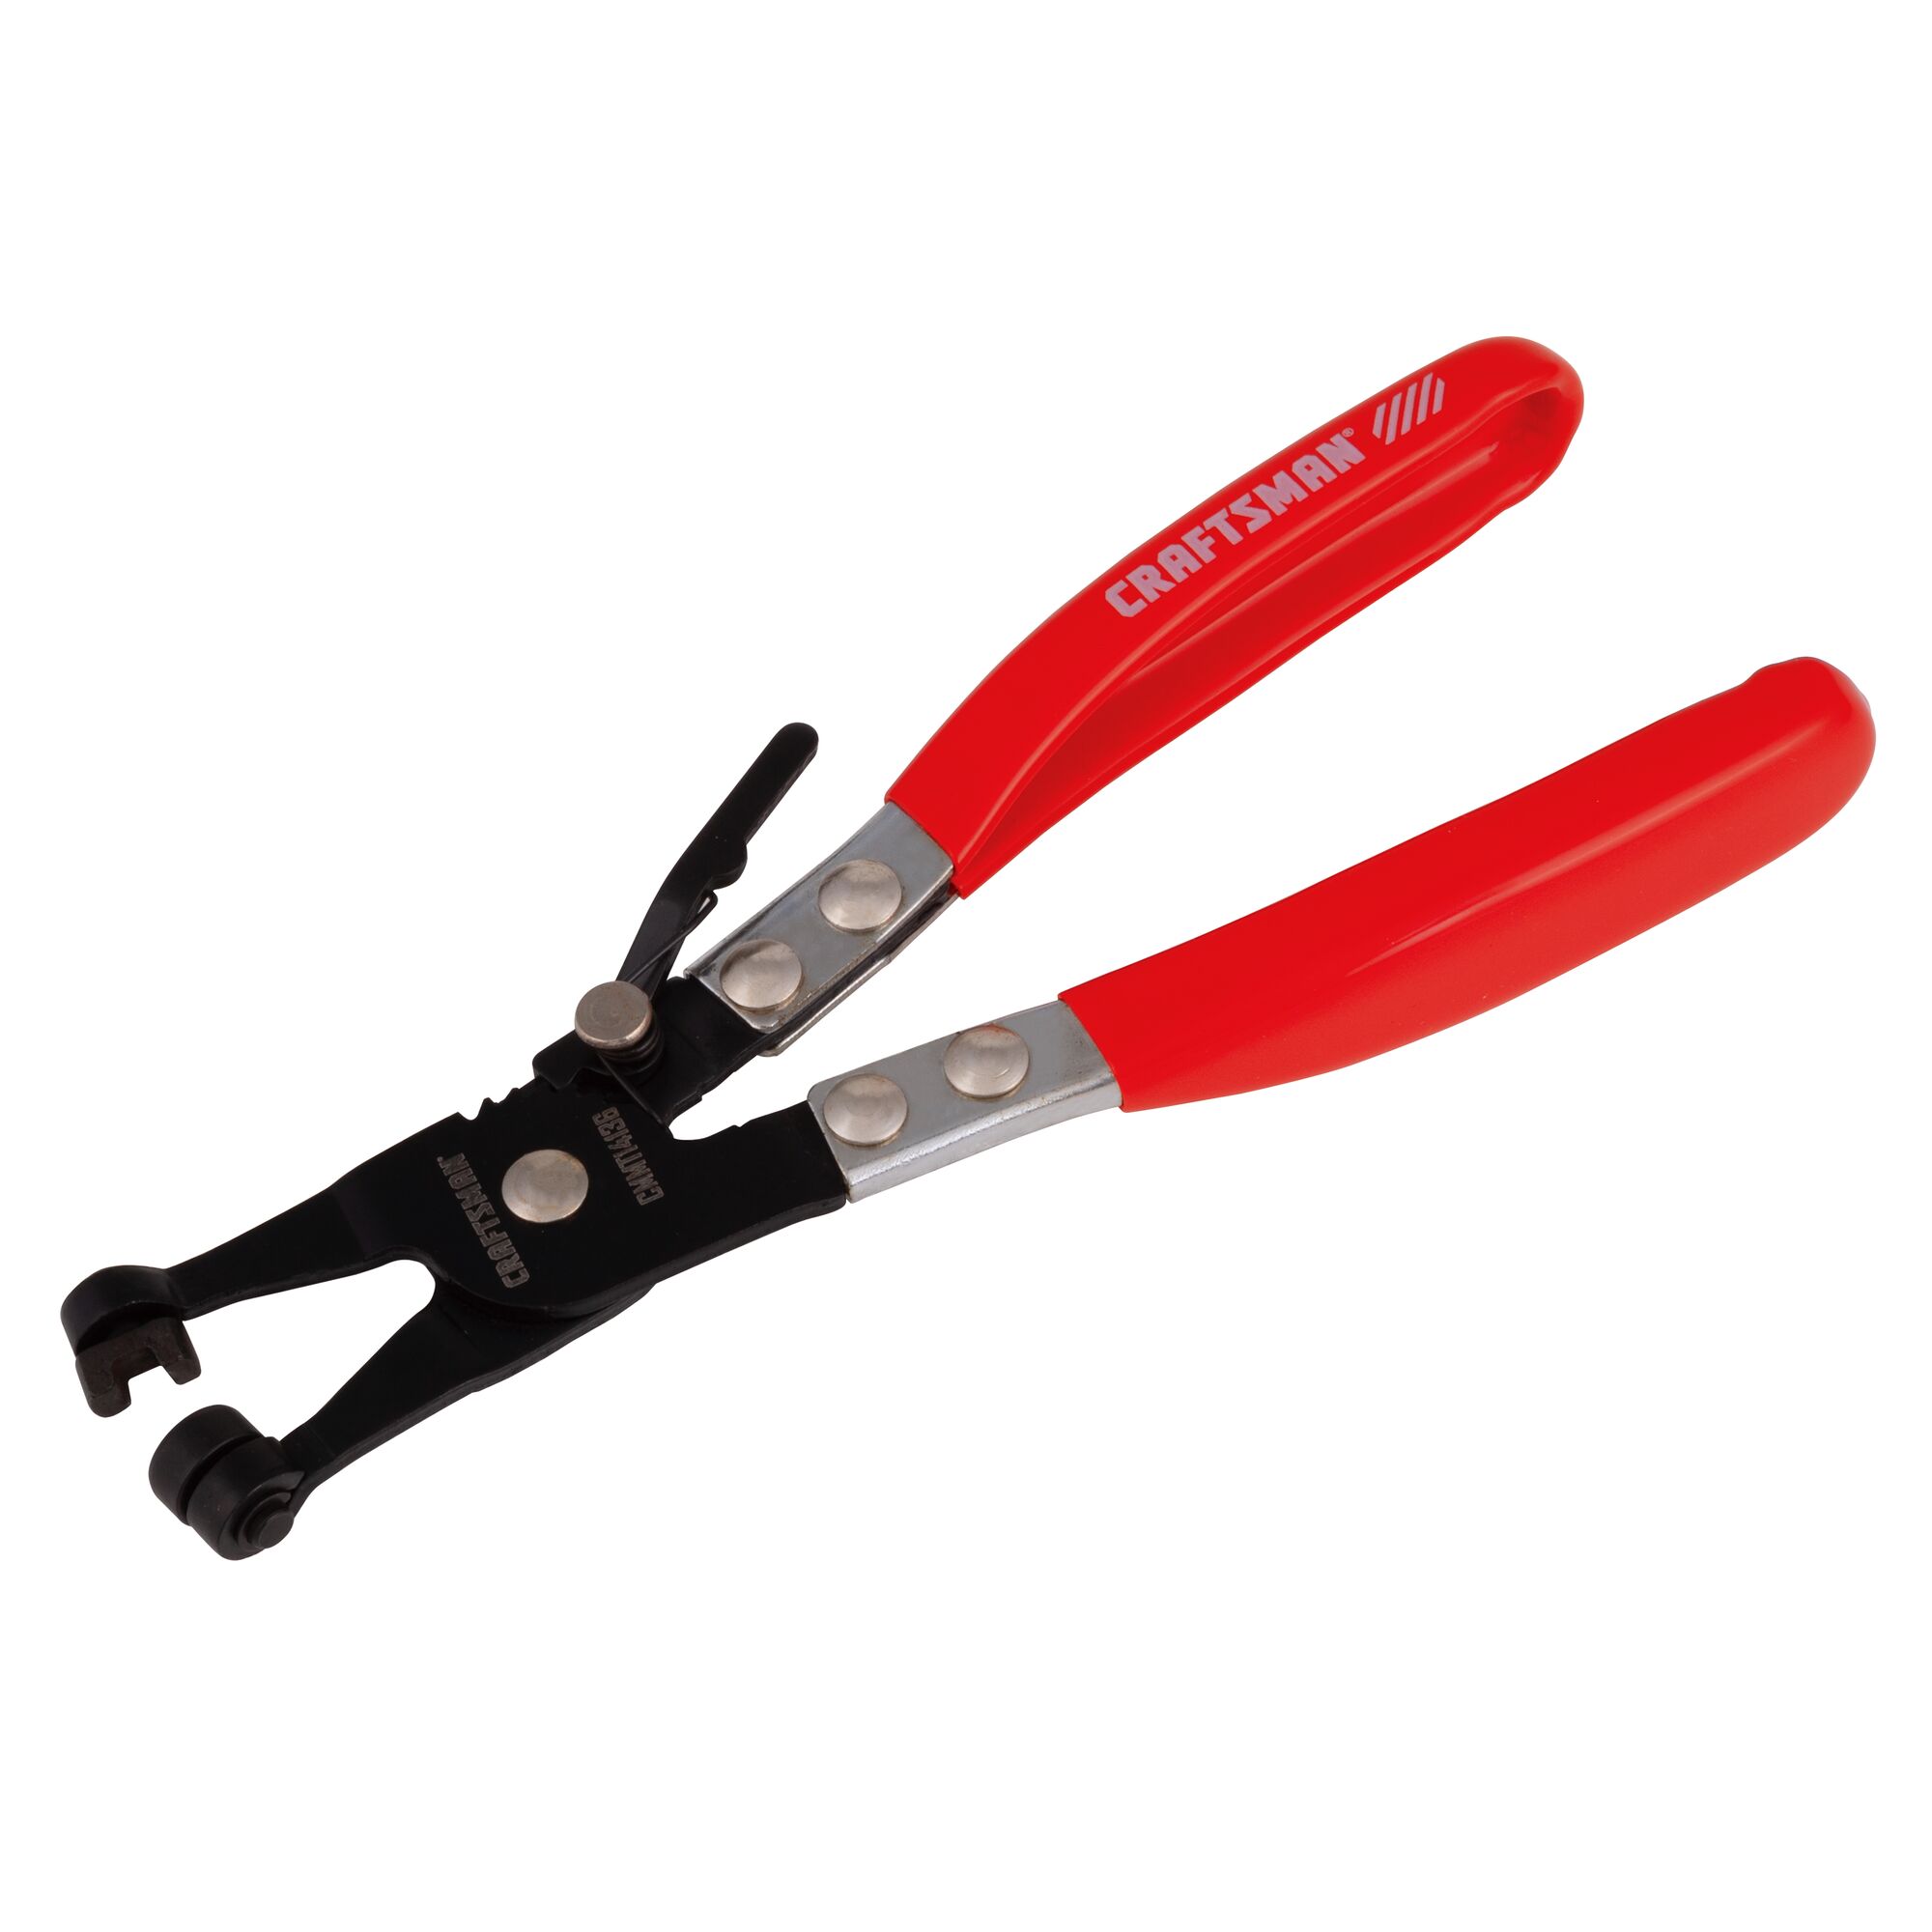 View of CRAFTSMAN Pliers on white background